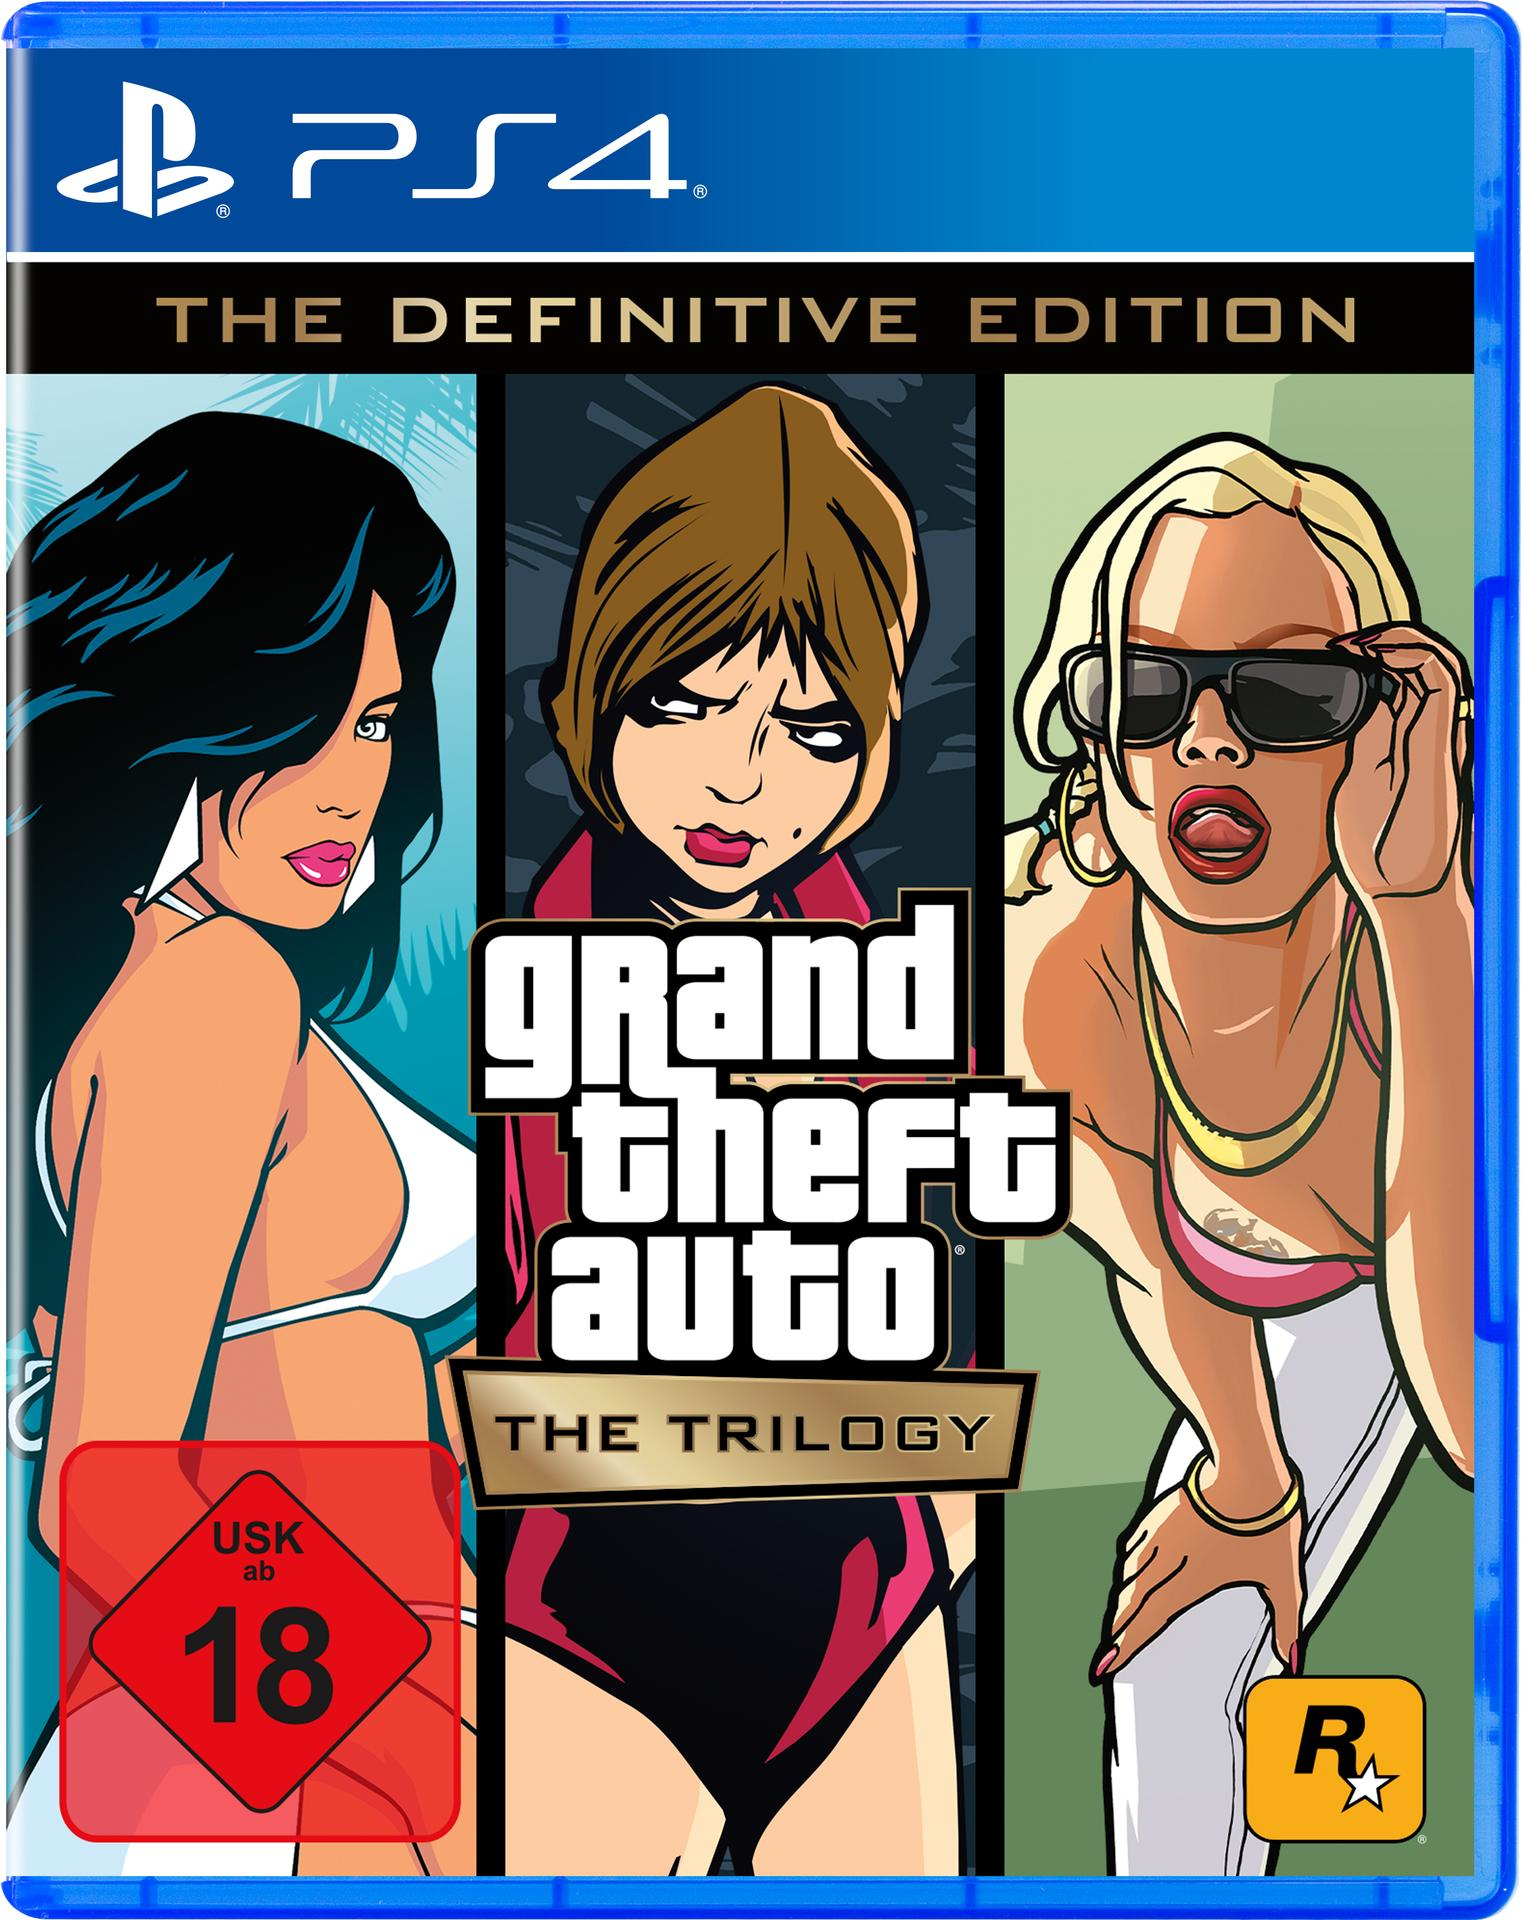 GTA5 - Grand Theft [PlayStation Definitive Trilogy Auto: Edition The – 4] - The